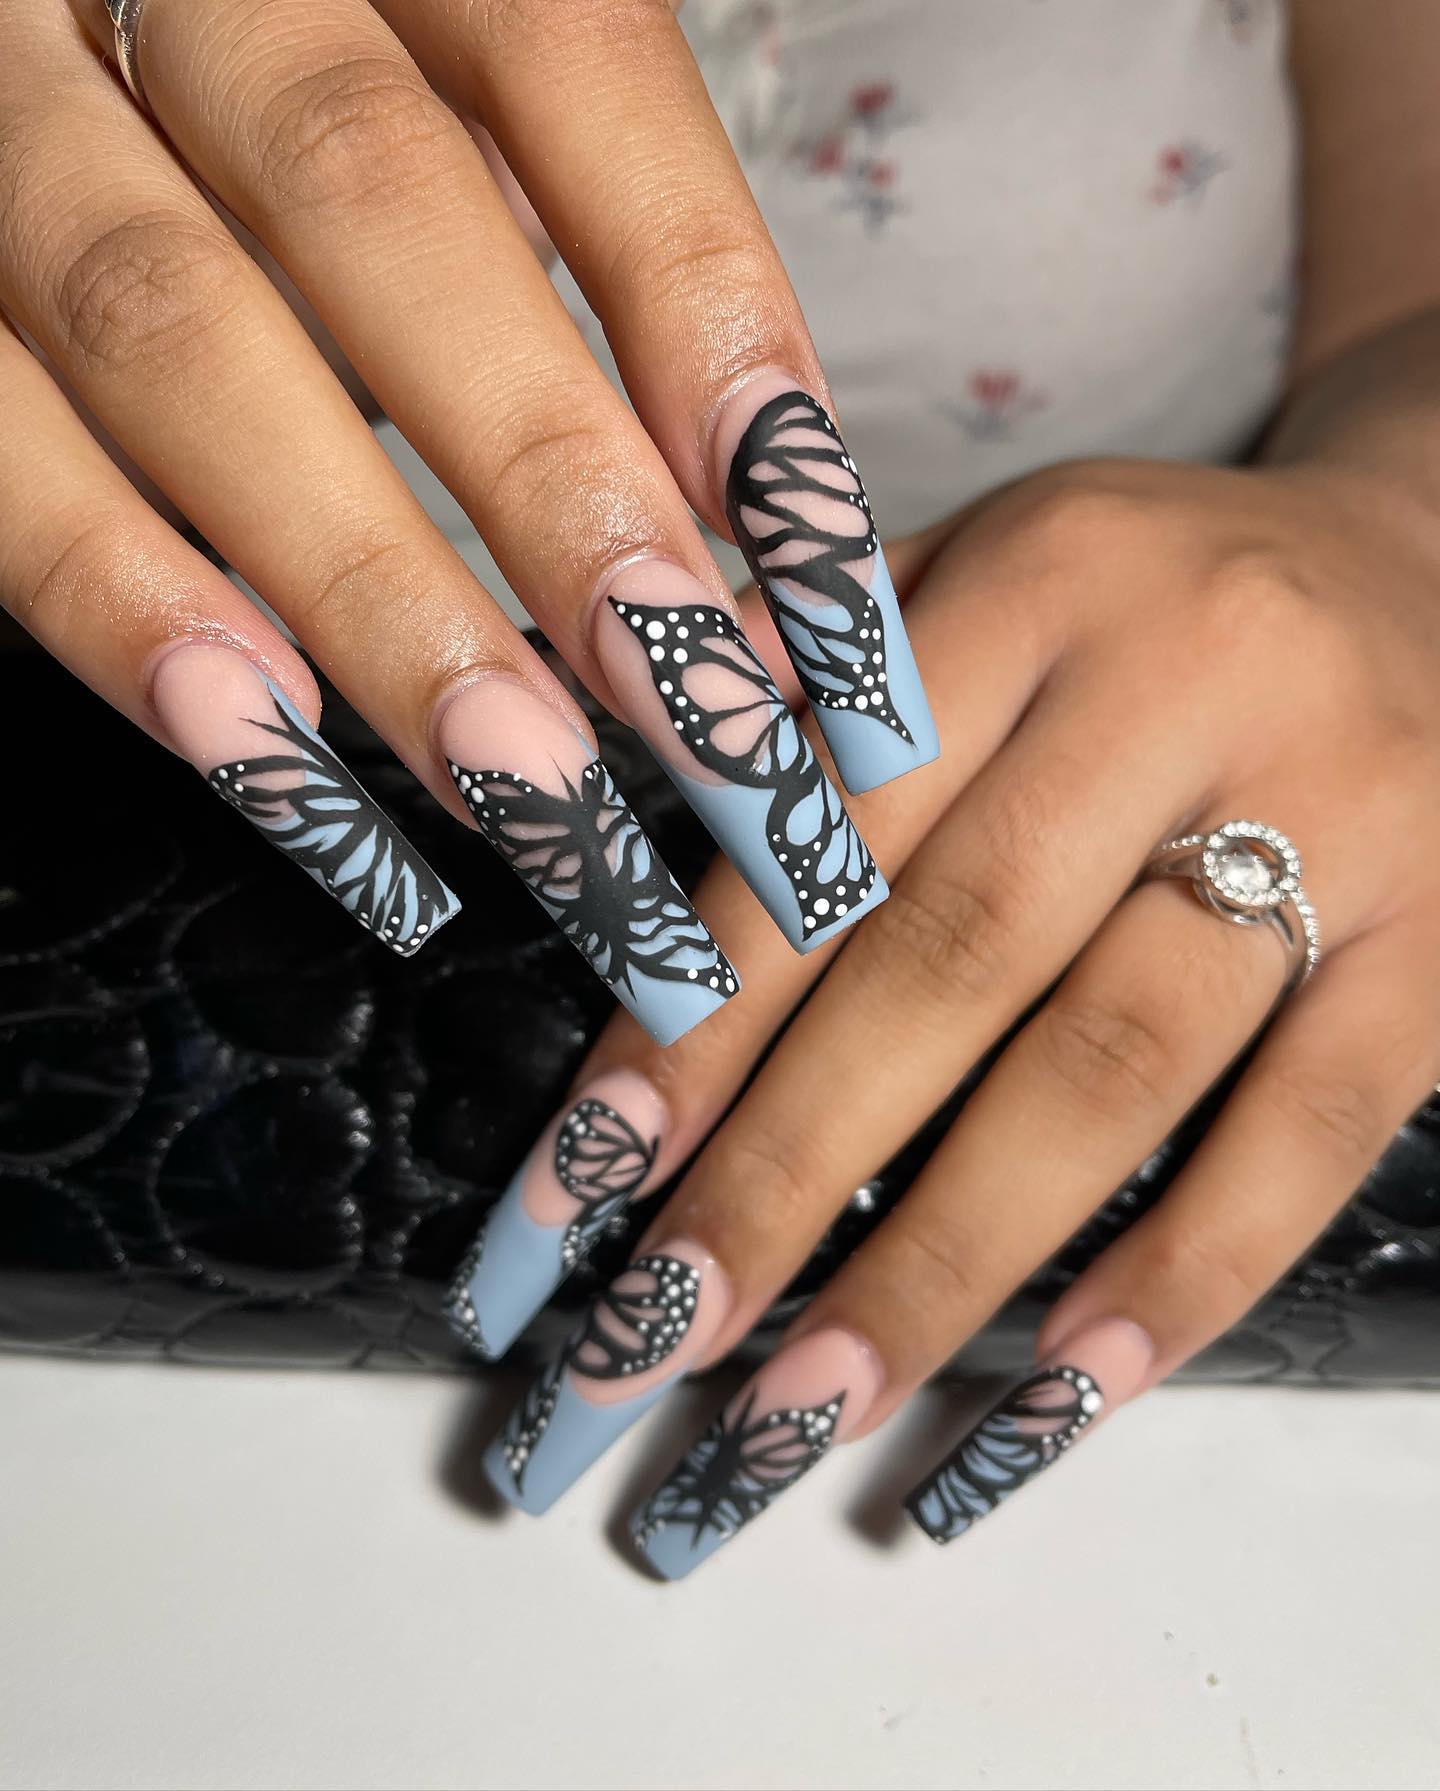 If you prefer a long square nail like this, it means you like to be different. Very detailed butterfly nail design will make you more different!